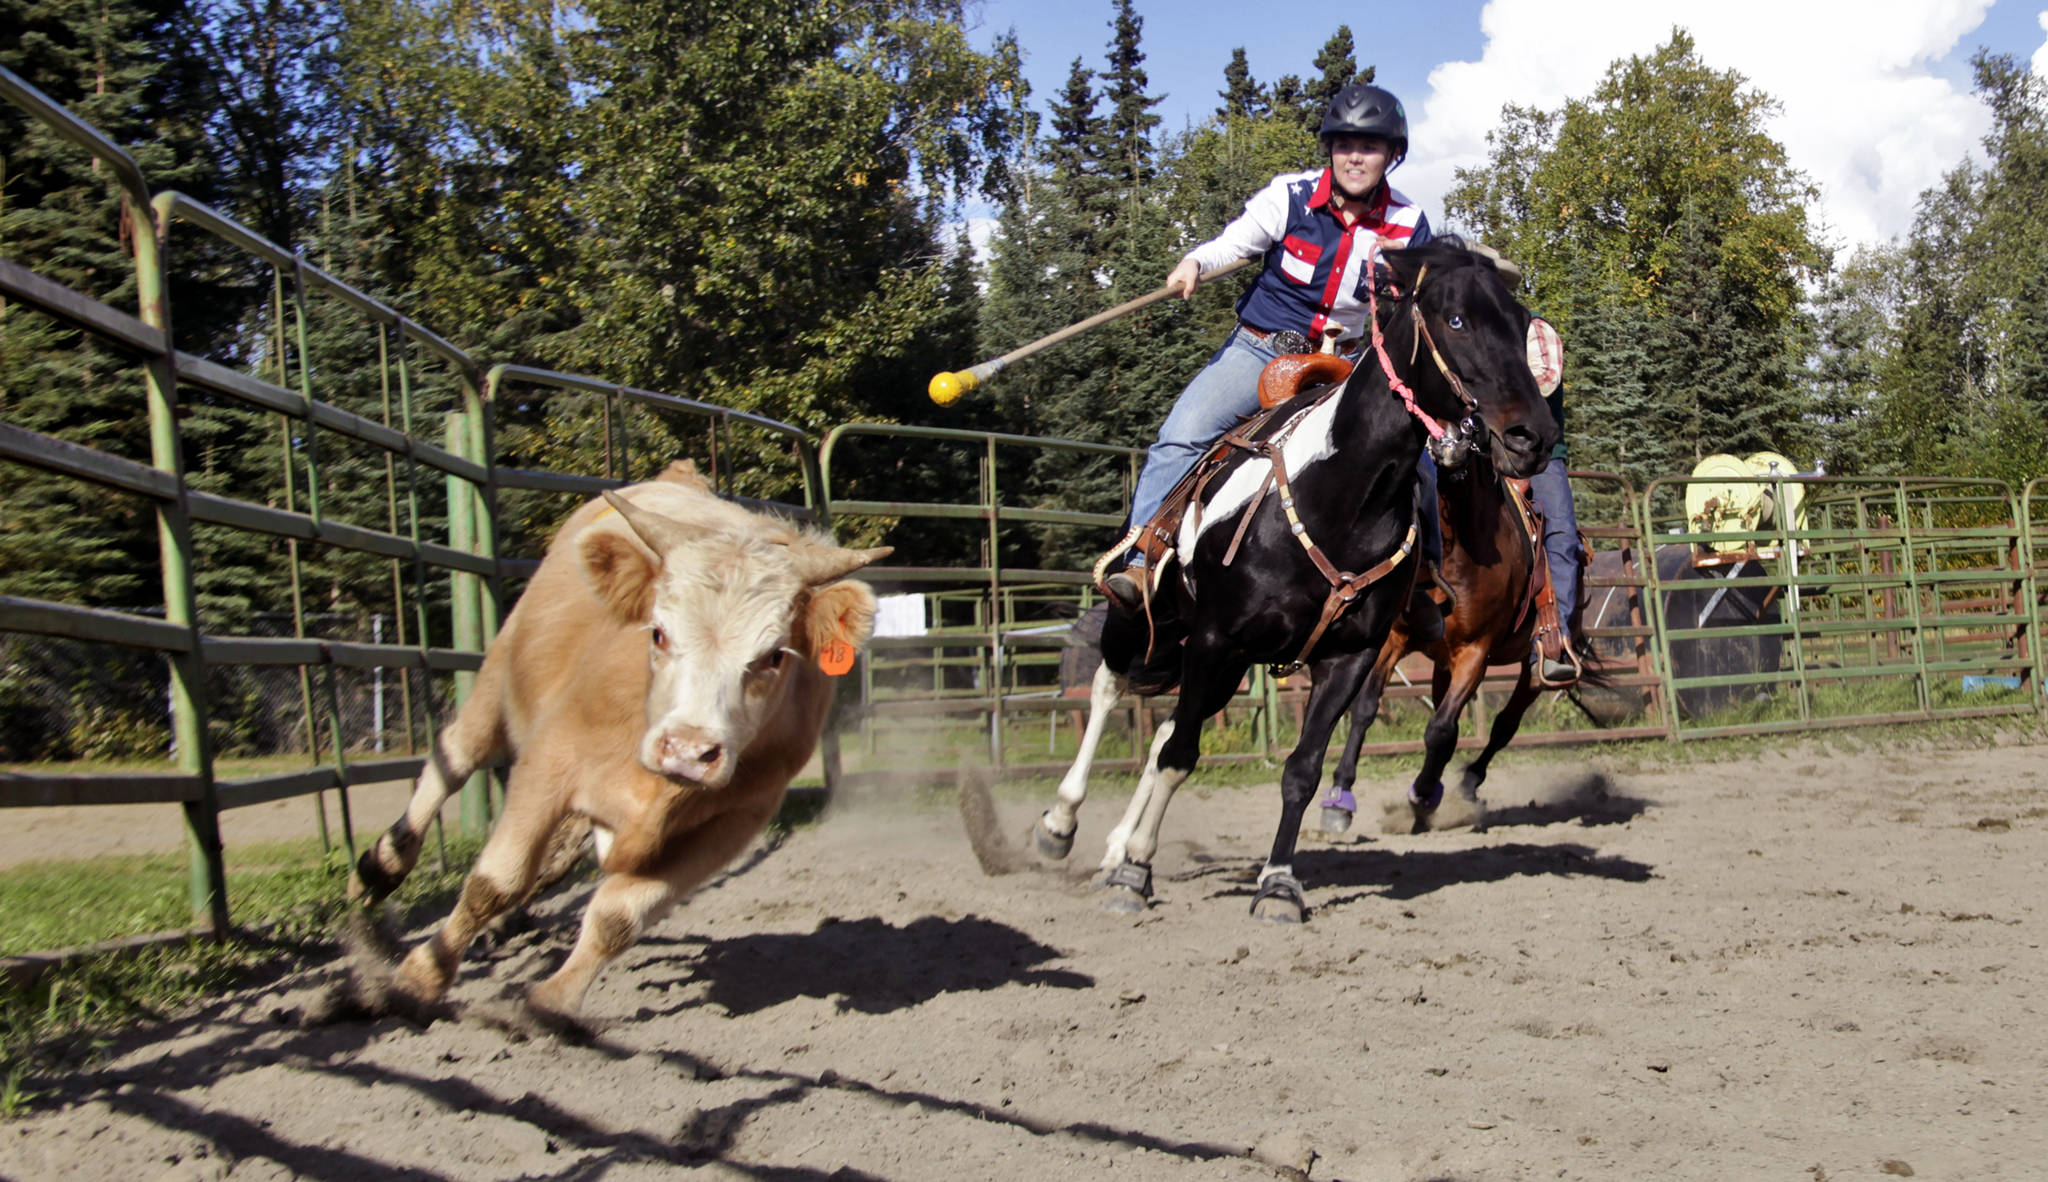 Madee Knowlton chases down a steer during the steer daubing event at the Soldotna Equestrian Club’s first 9-11 Tribute Rodeo, junior division, on Saturday, Sept. 9, 2017 in Soldotna’s Centennial Park. In steer daubing, riders carry poles tipped with swabs dipped in mustard to tag a running steer forward of its shoulder. (Ben Boettger/Peninsula Clarion)